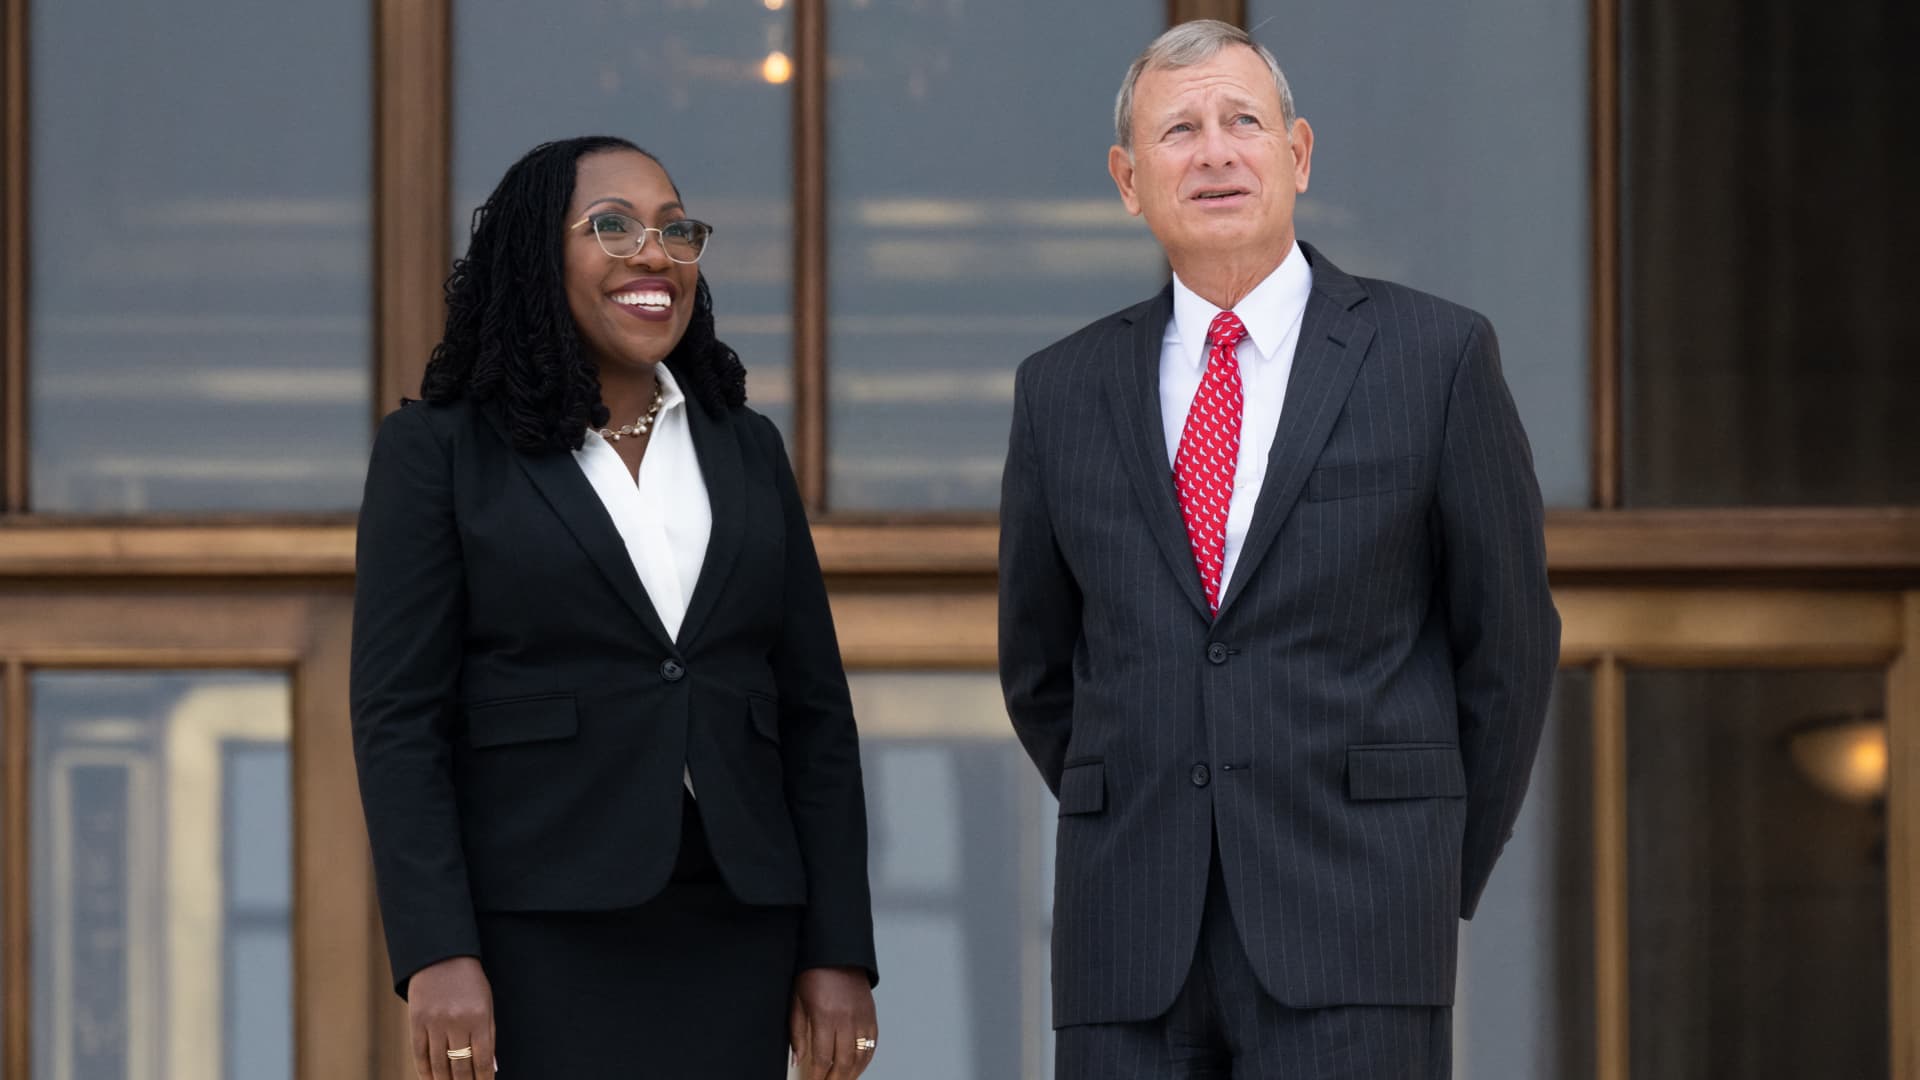 US Supreme Court Justice Ketanji Brown Jackson speaks with Chief Justice John Roberts on the steps of the US Supreme Court, immediately following the investiture ceremony of Justice Jackson, in Washington, DC, September 30, 2022.